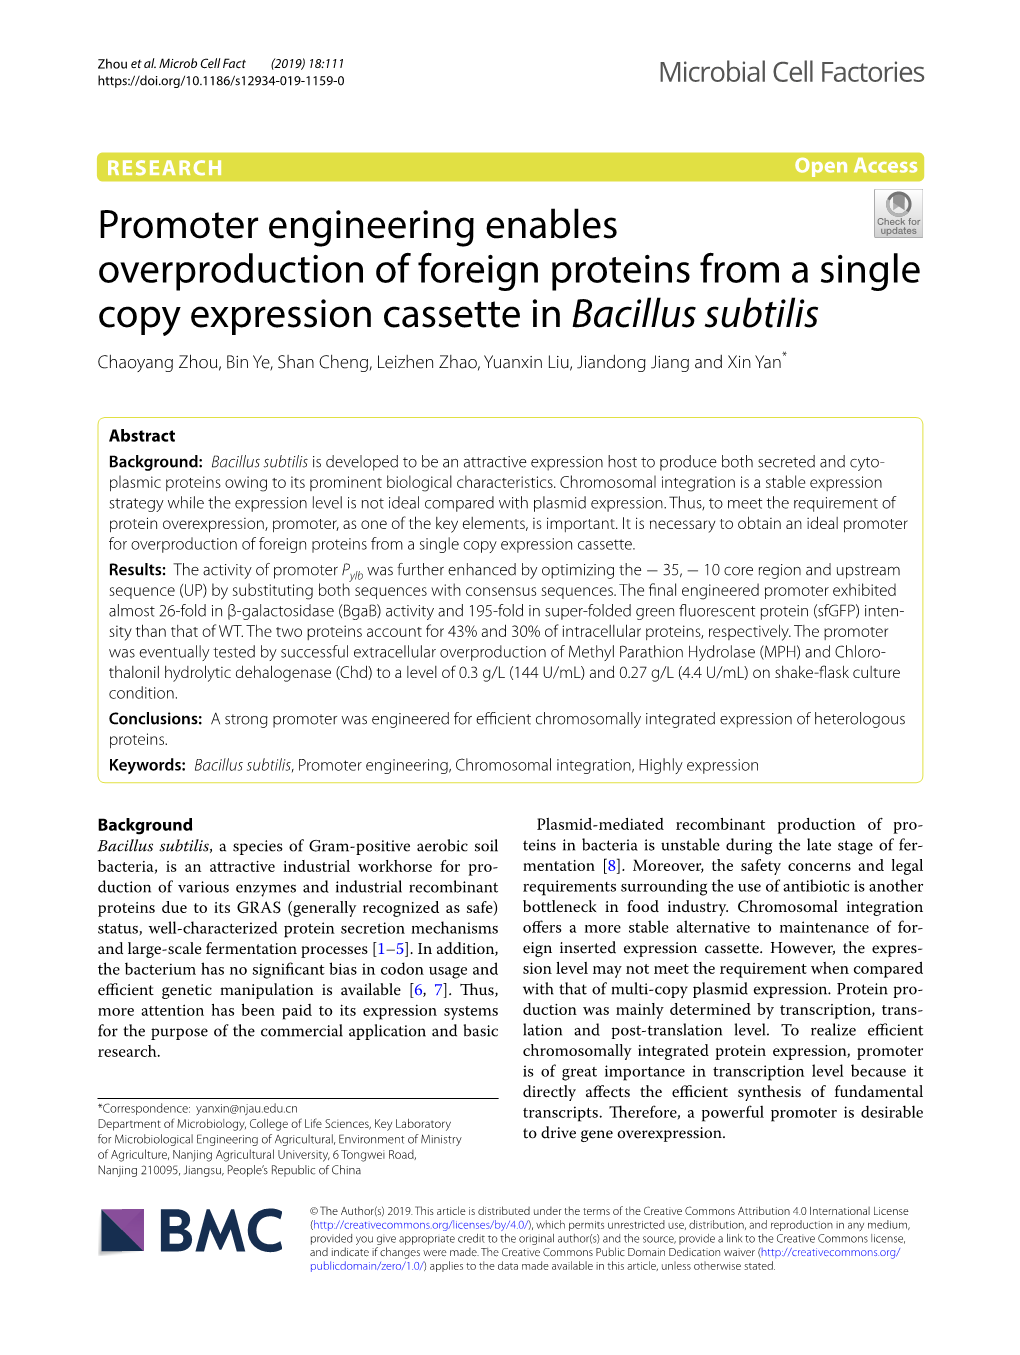 Promoter Engineering Enables Overproduction of Foreign Proteins from a Single Copy Expression Cassette in Bacillus Subtilis